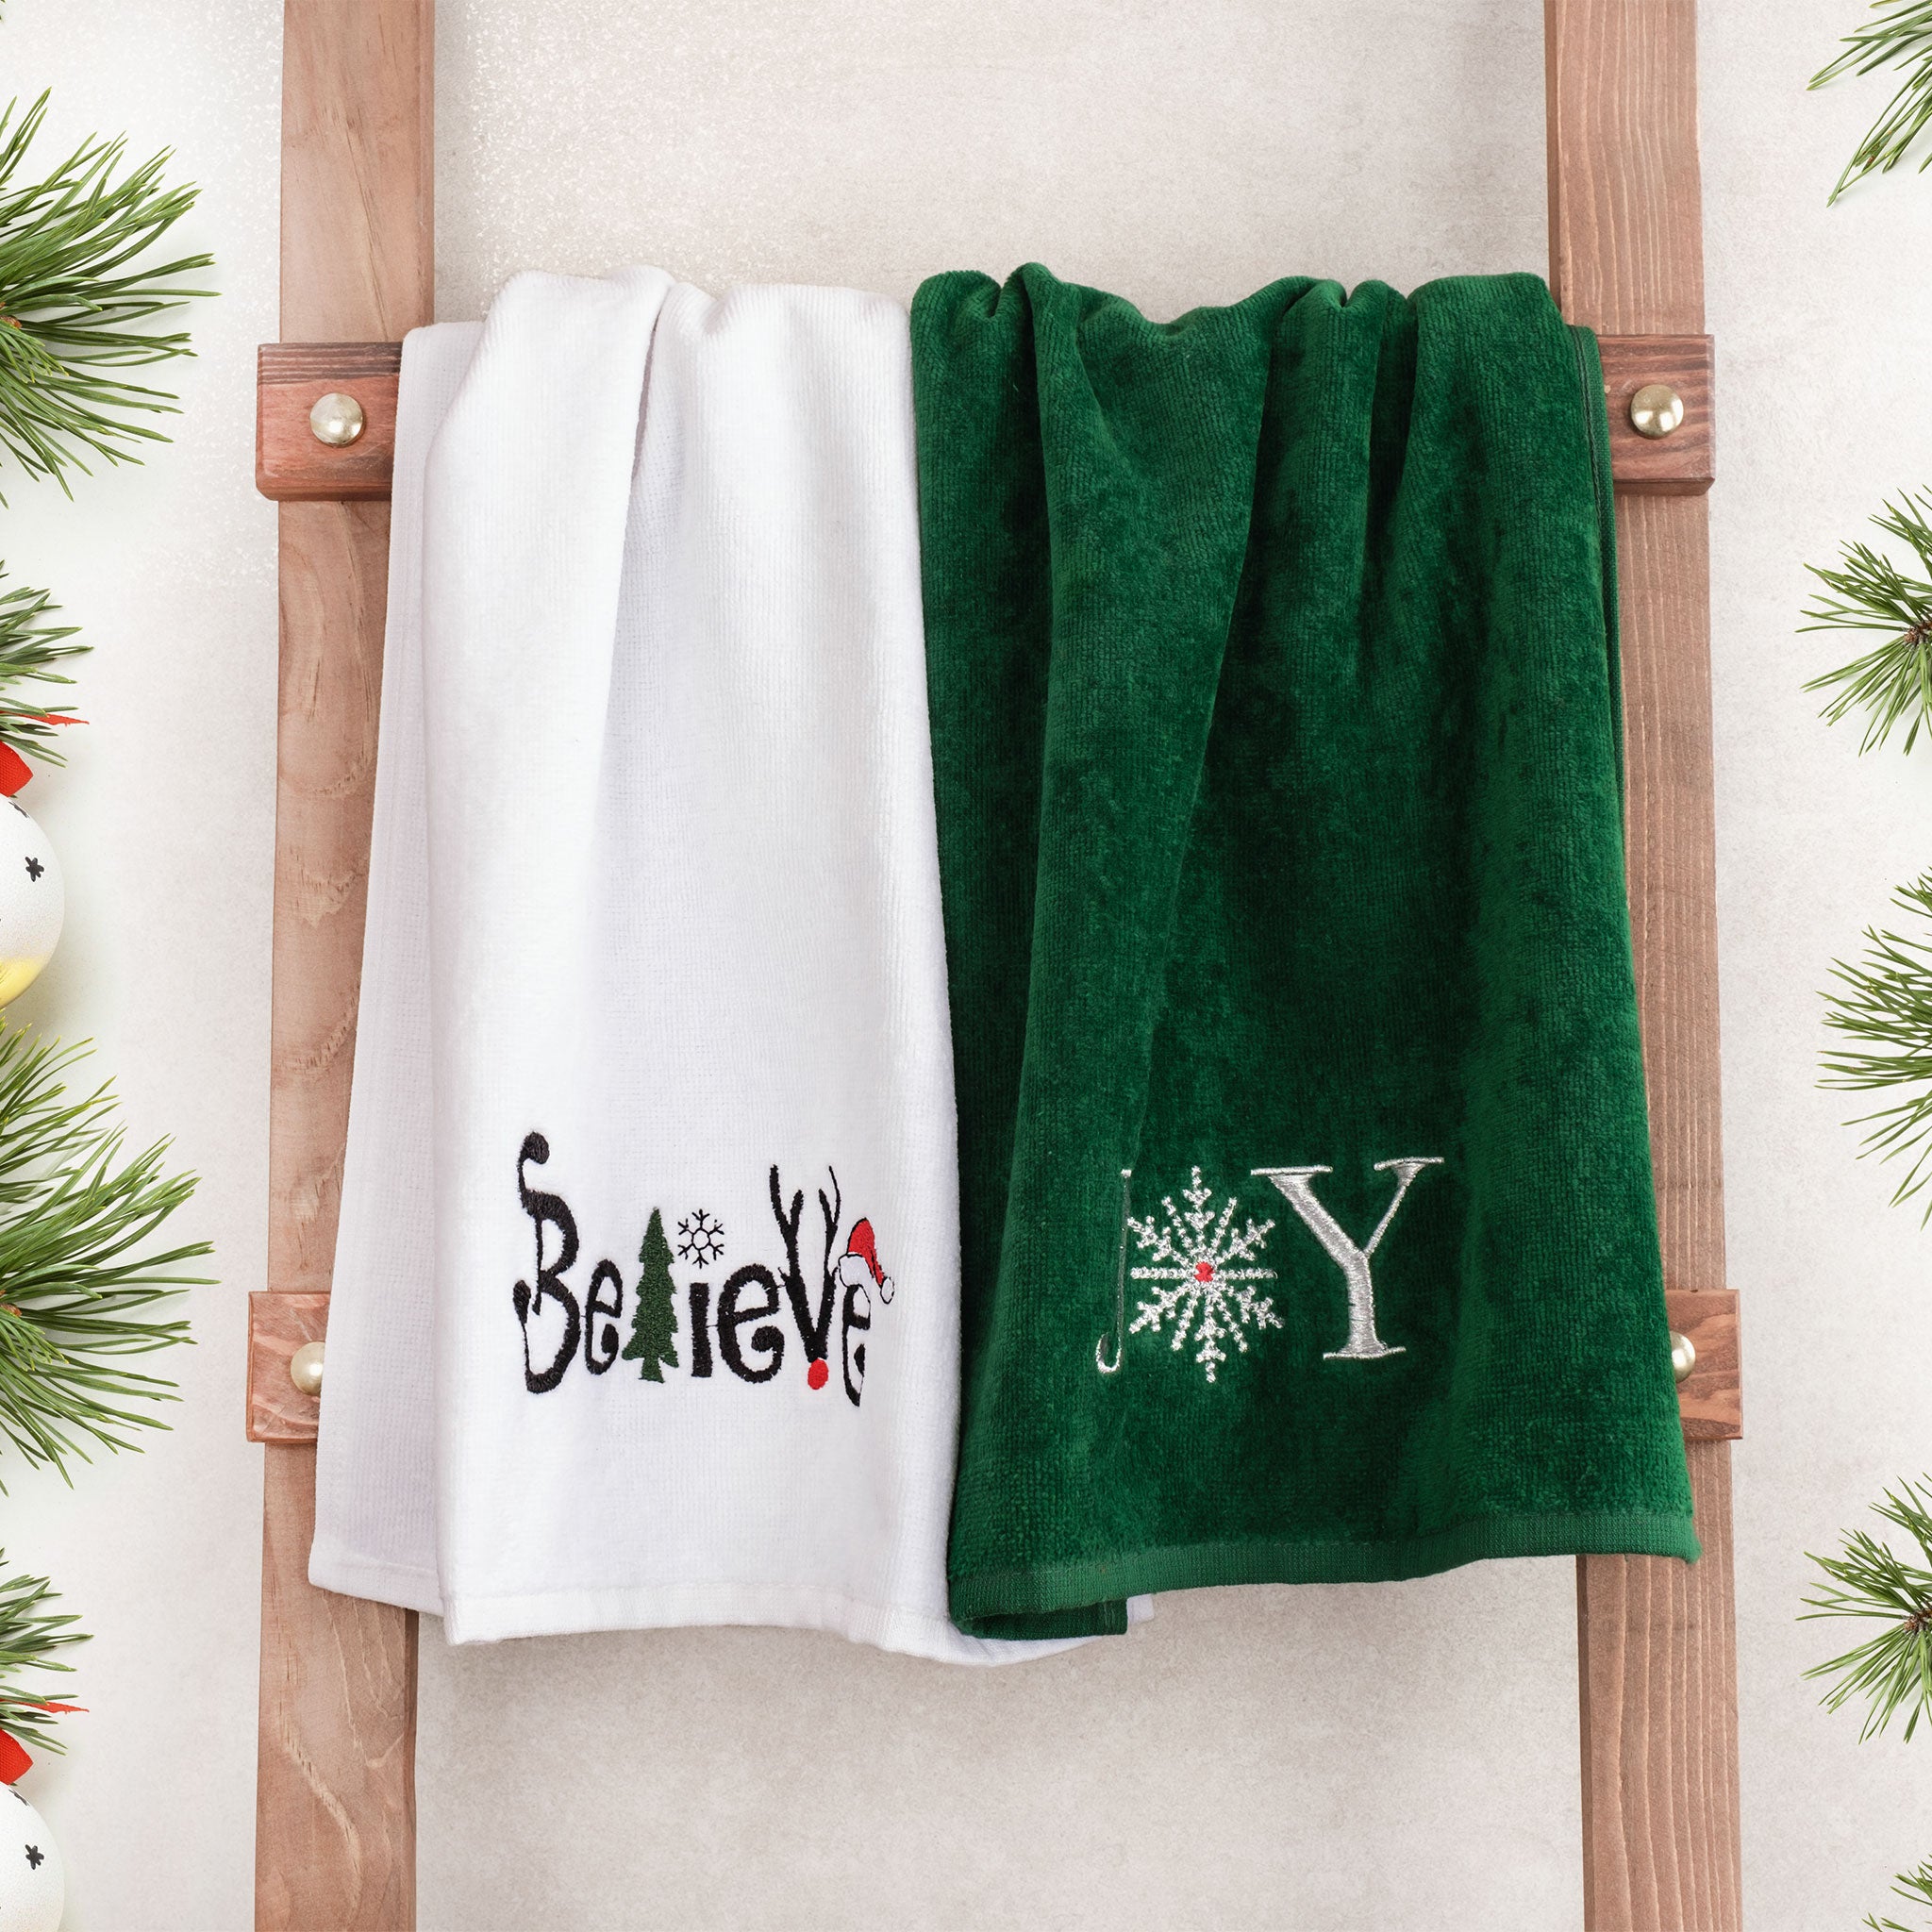 American Soft Linen - Christmas Towels 2  Packed Embroidered Towels for Decor Xmas - 60 Set Case Pack - Joy-Believe - 3